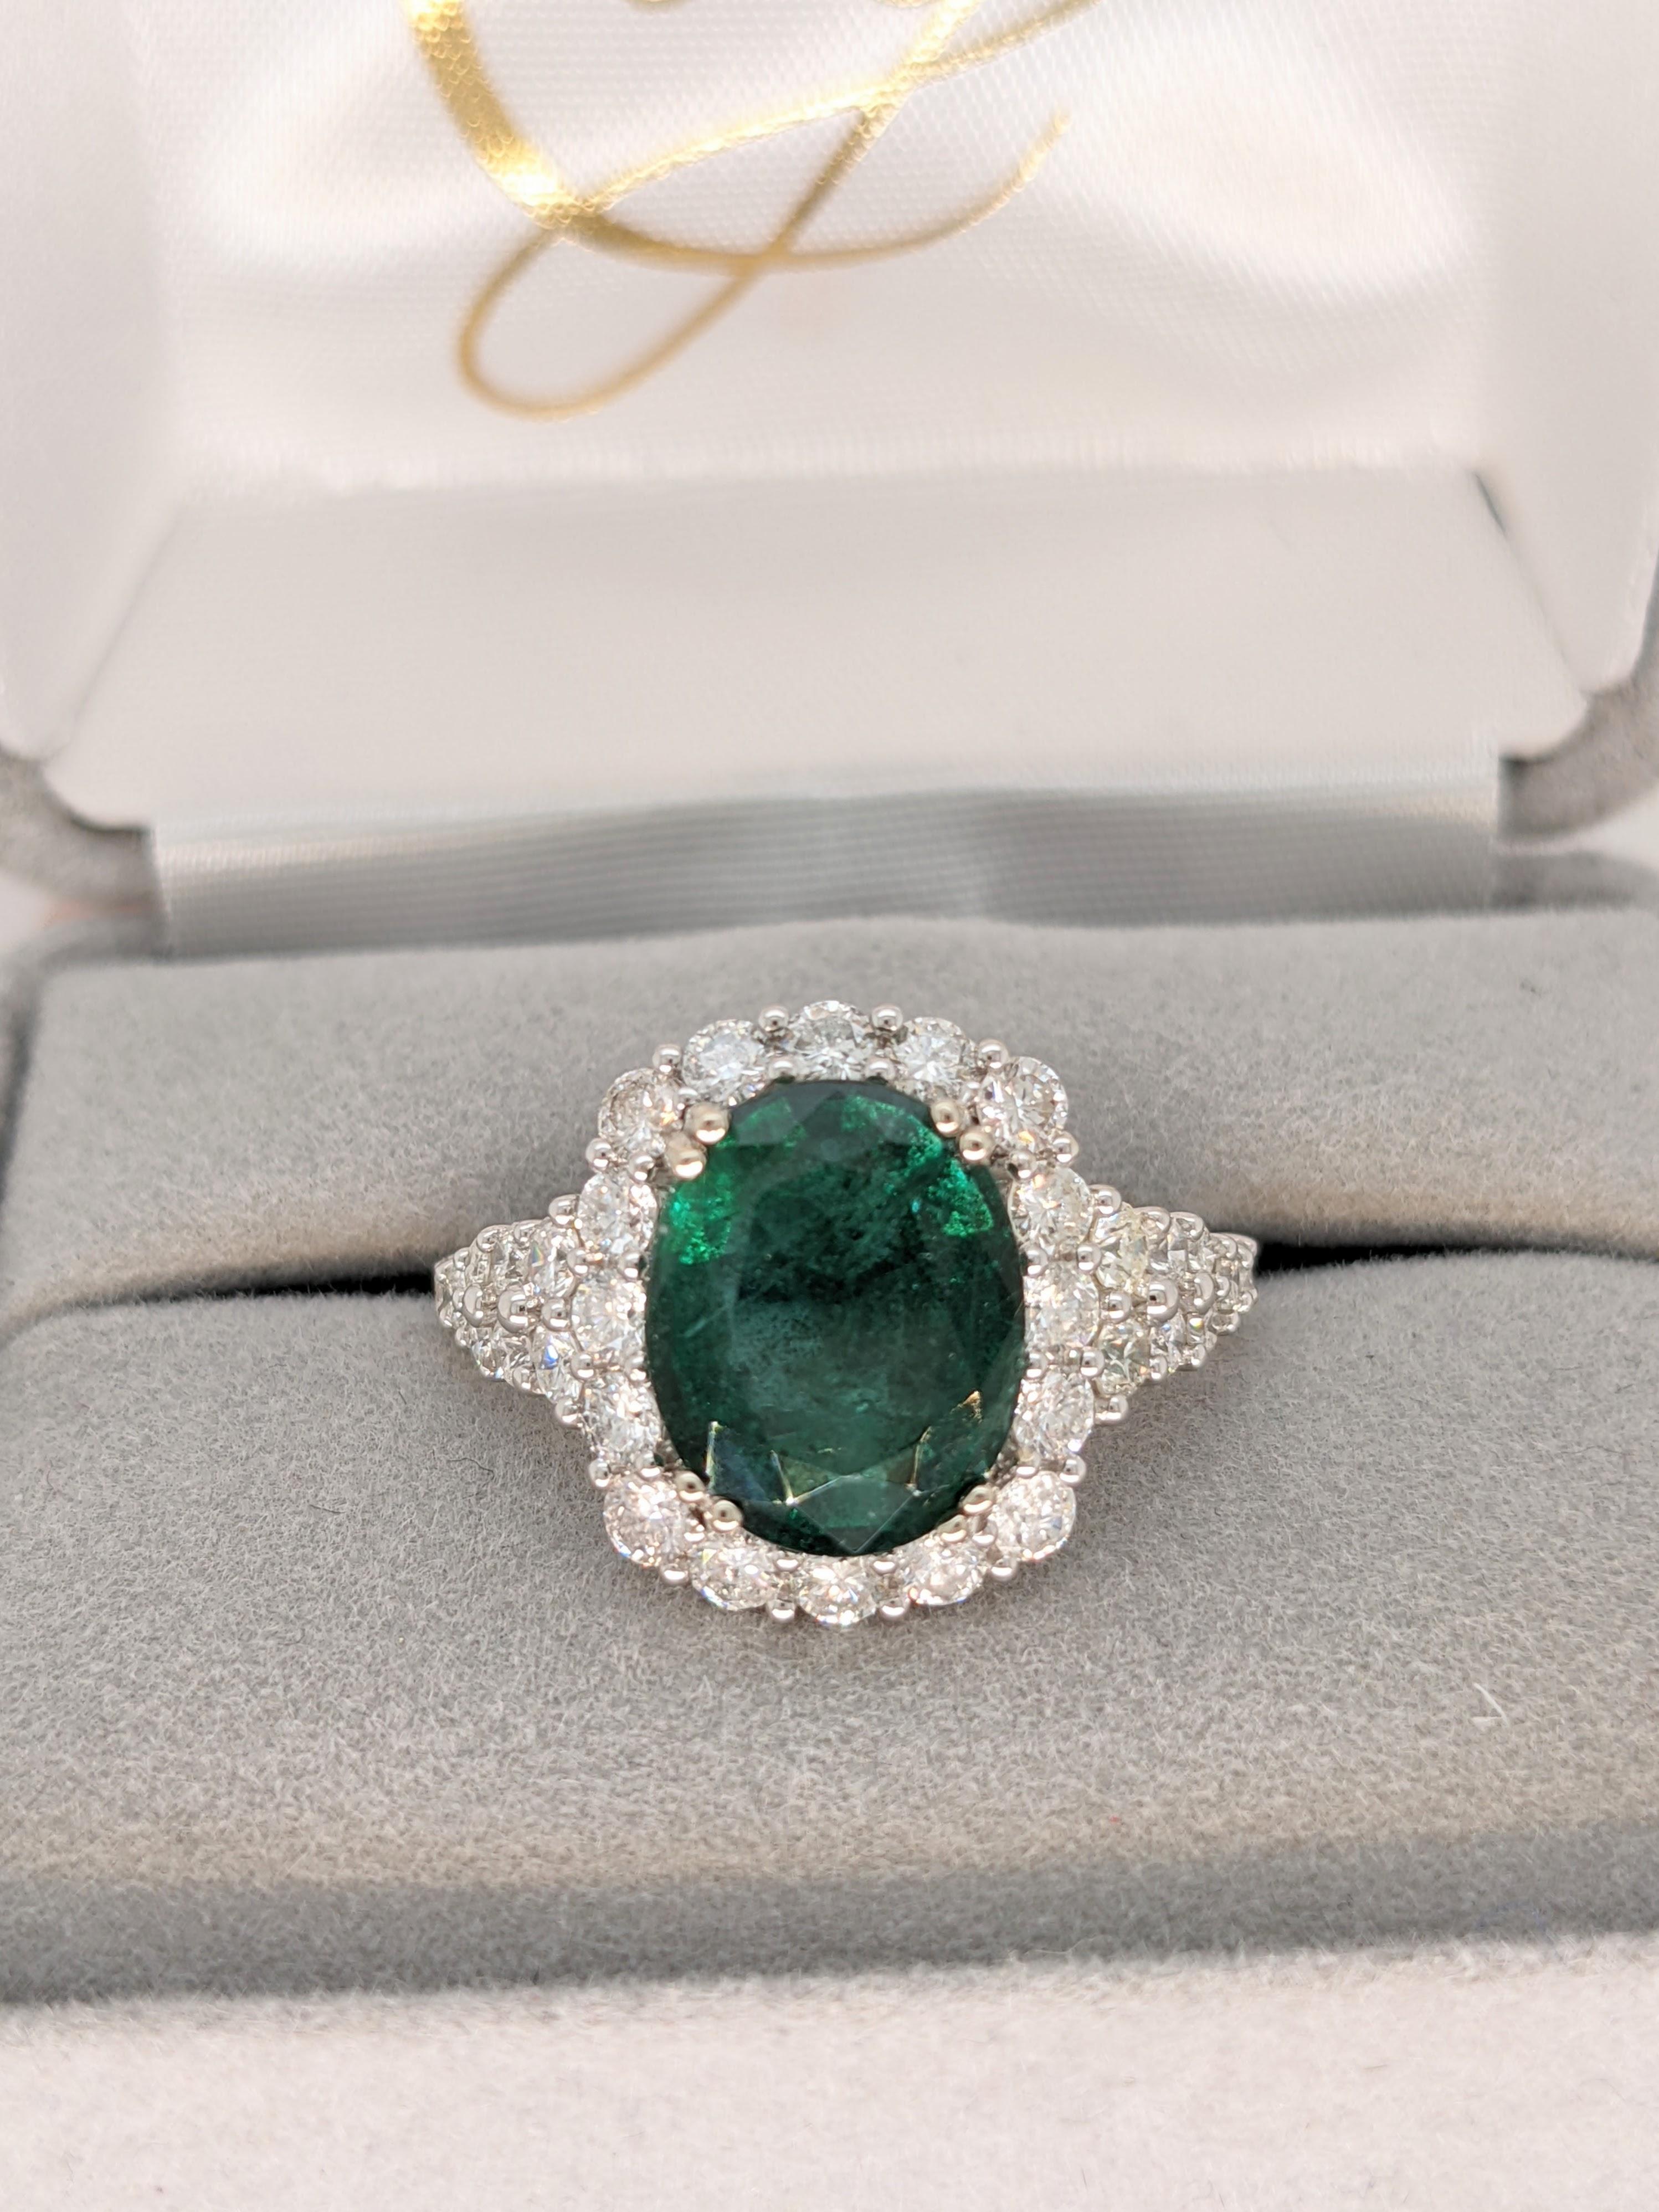 3 Carat Emerald Ring in 14k Solid White Gold with a Halo of Natural Diamonds For Sale 1